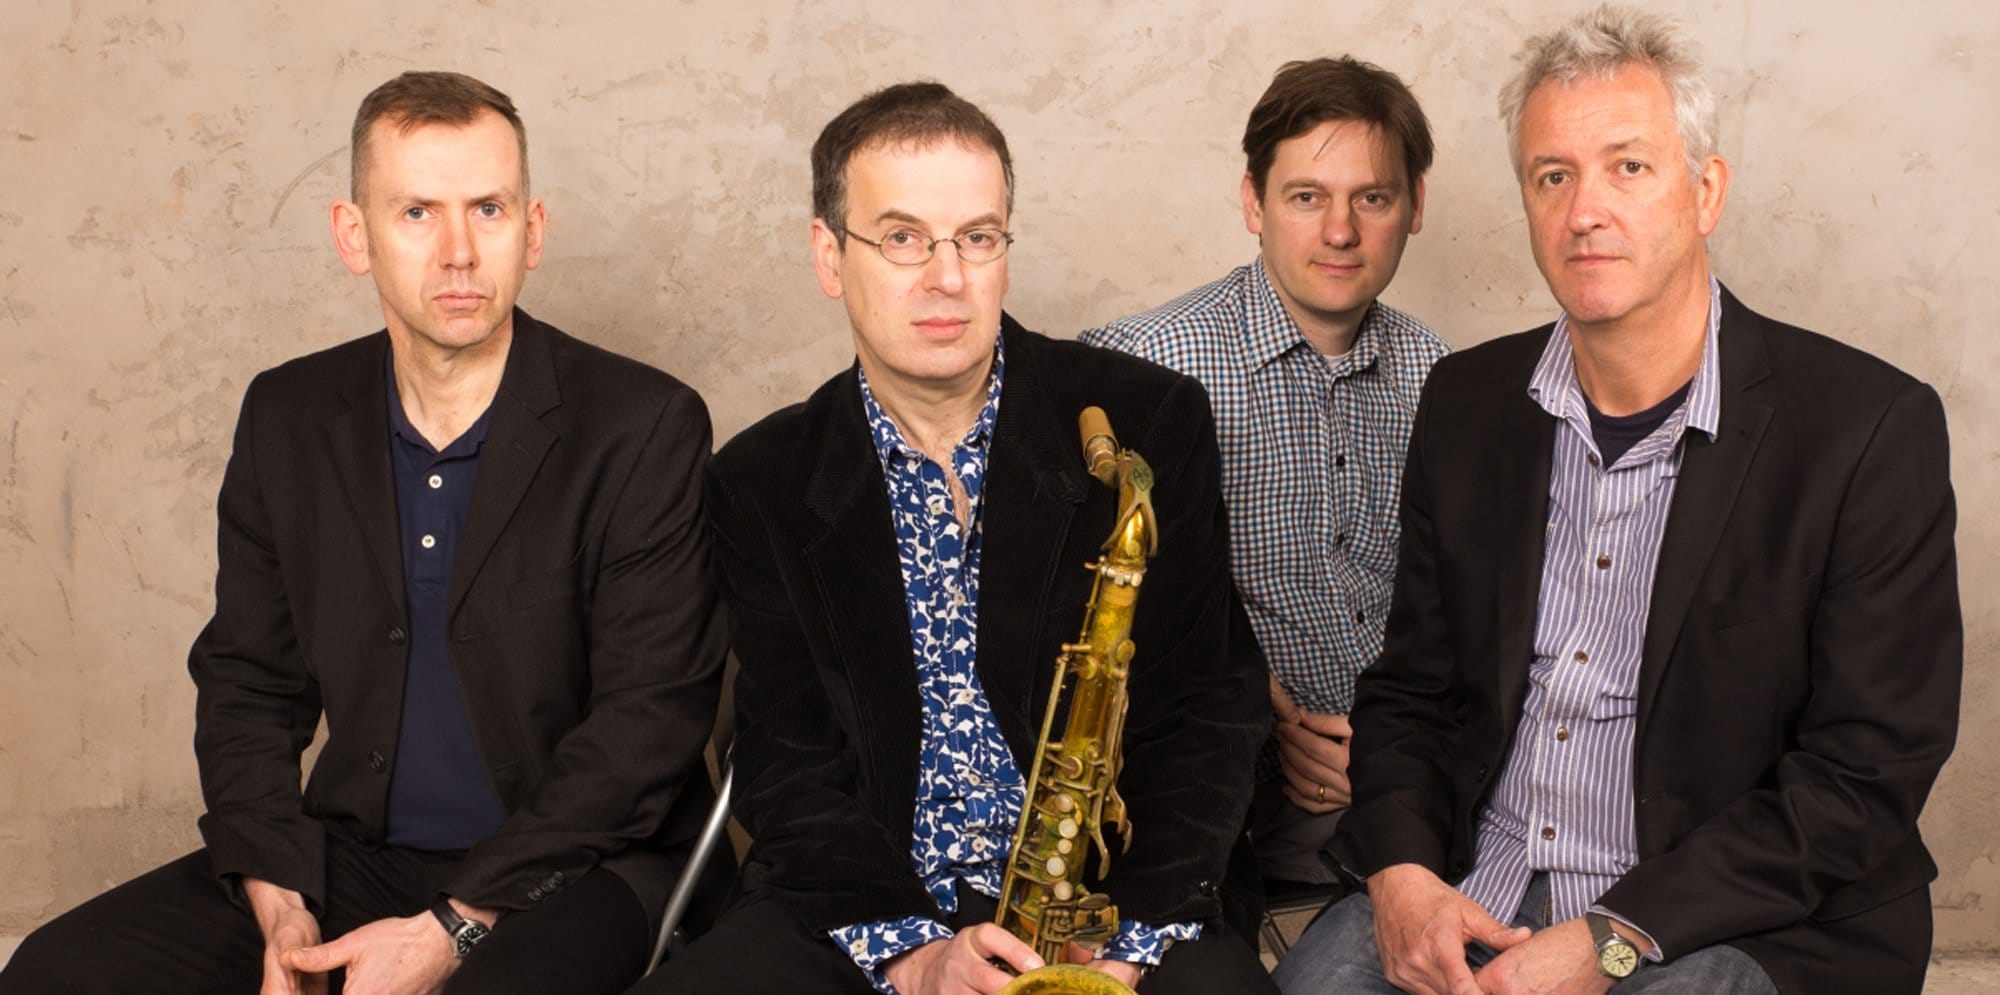 The Theo Travis Music group sit, one is holding a saxaphone